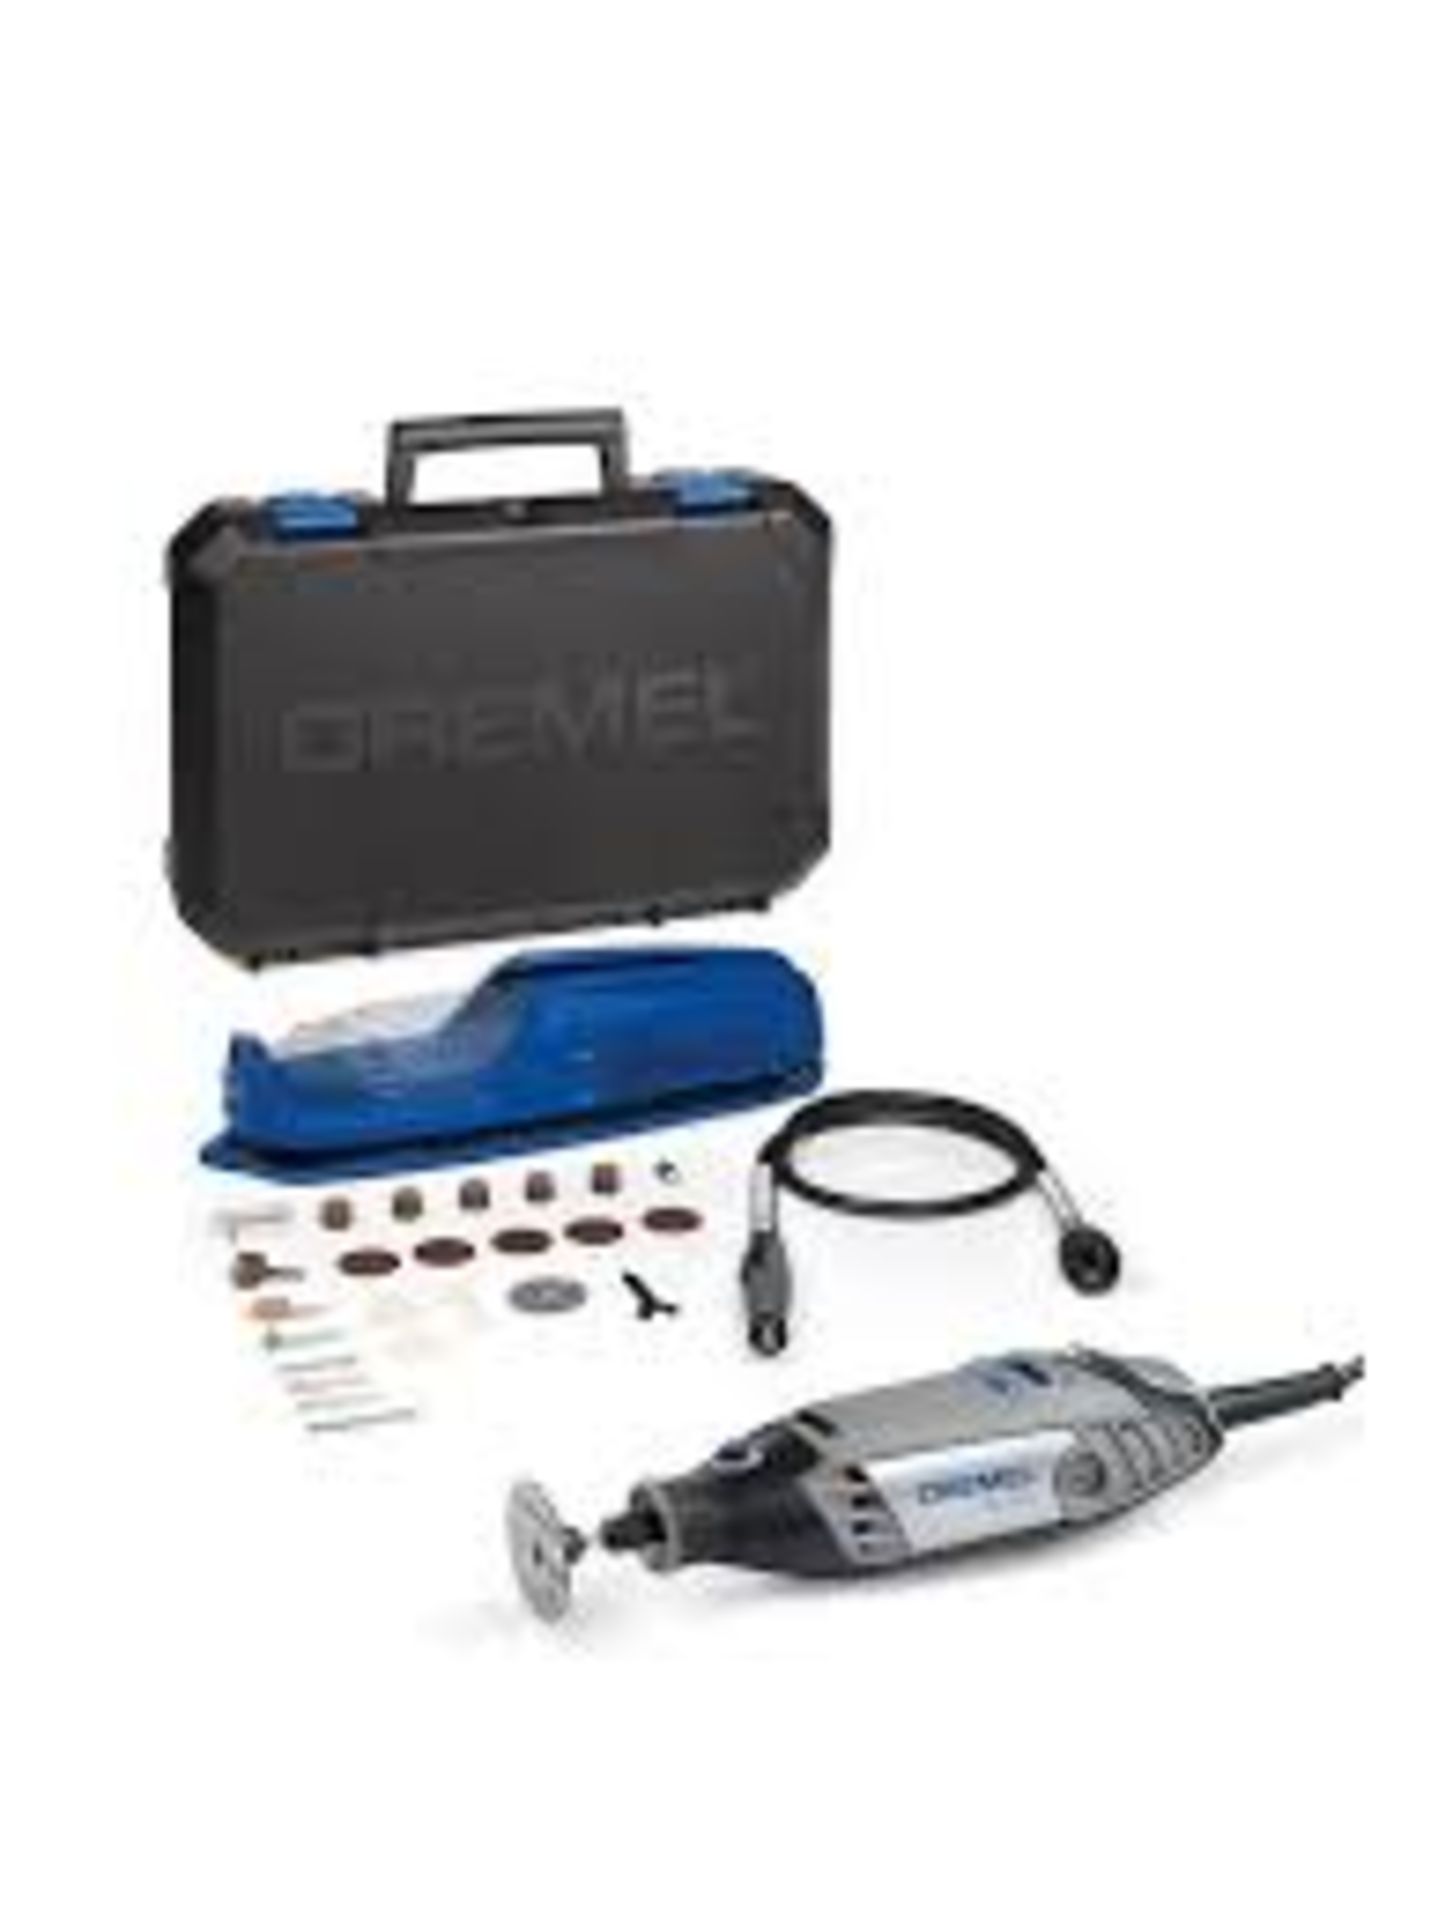 Dremel 3000-1/25 Multi-Tool Kit, EZ Wrap Case. - S2.11.. Work on your DIY projects comfortably for